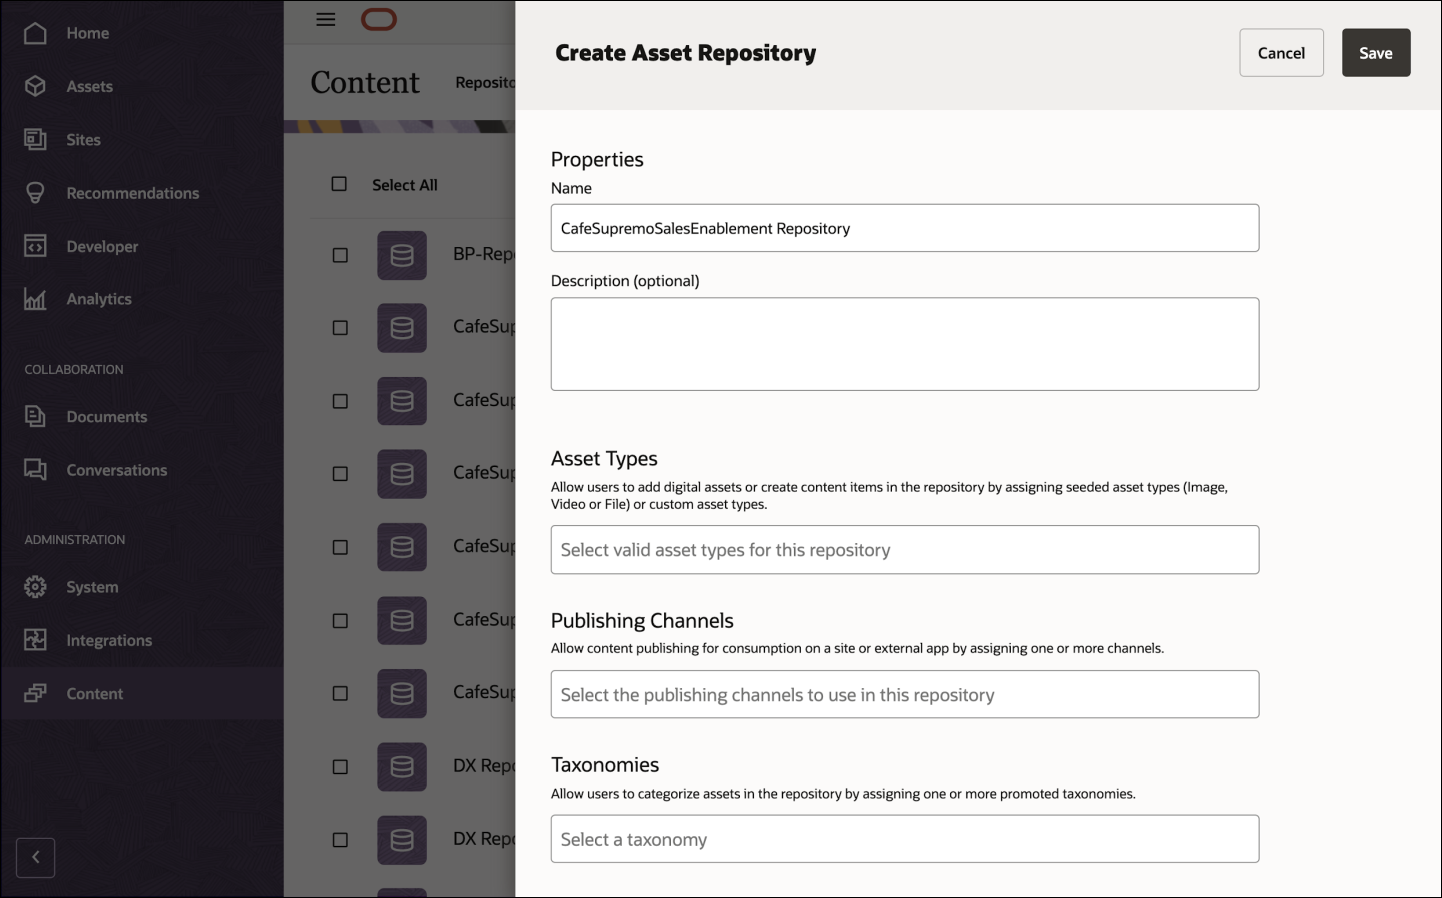 This image shows the Create Asset Repository page in the Oracle Content Management web interface.